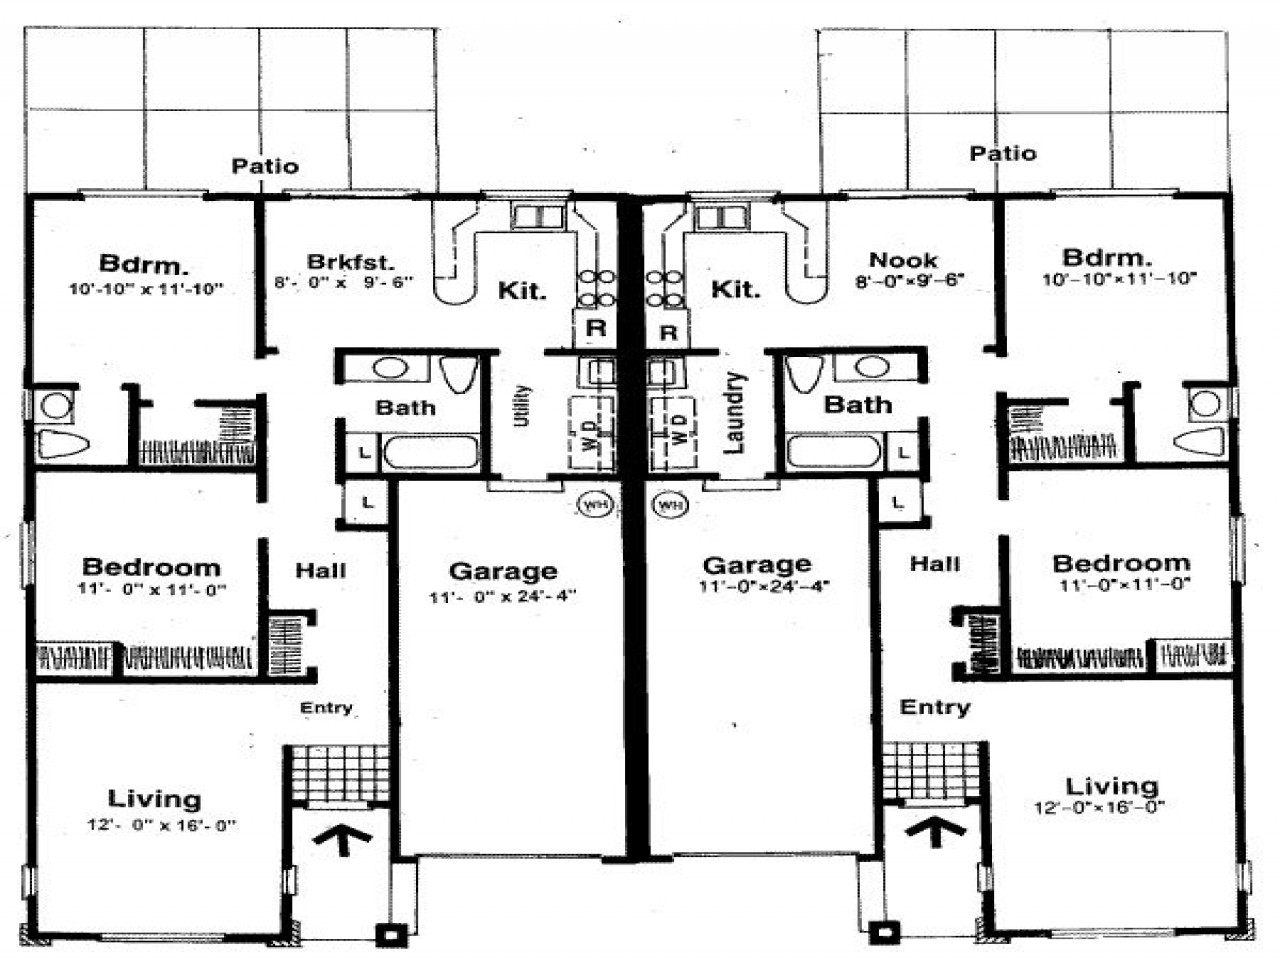 Two Master Bedroom Floor Plans
 Small Two Bedroom House Plans House Plans with Two Master